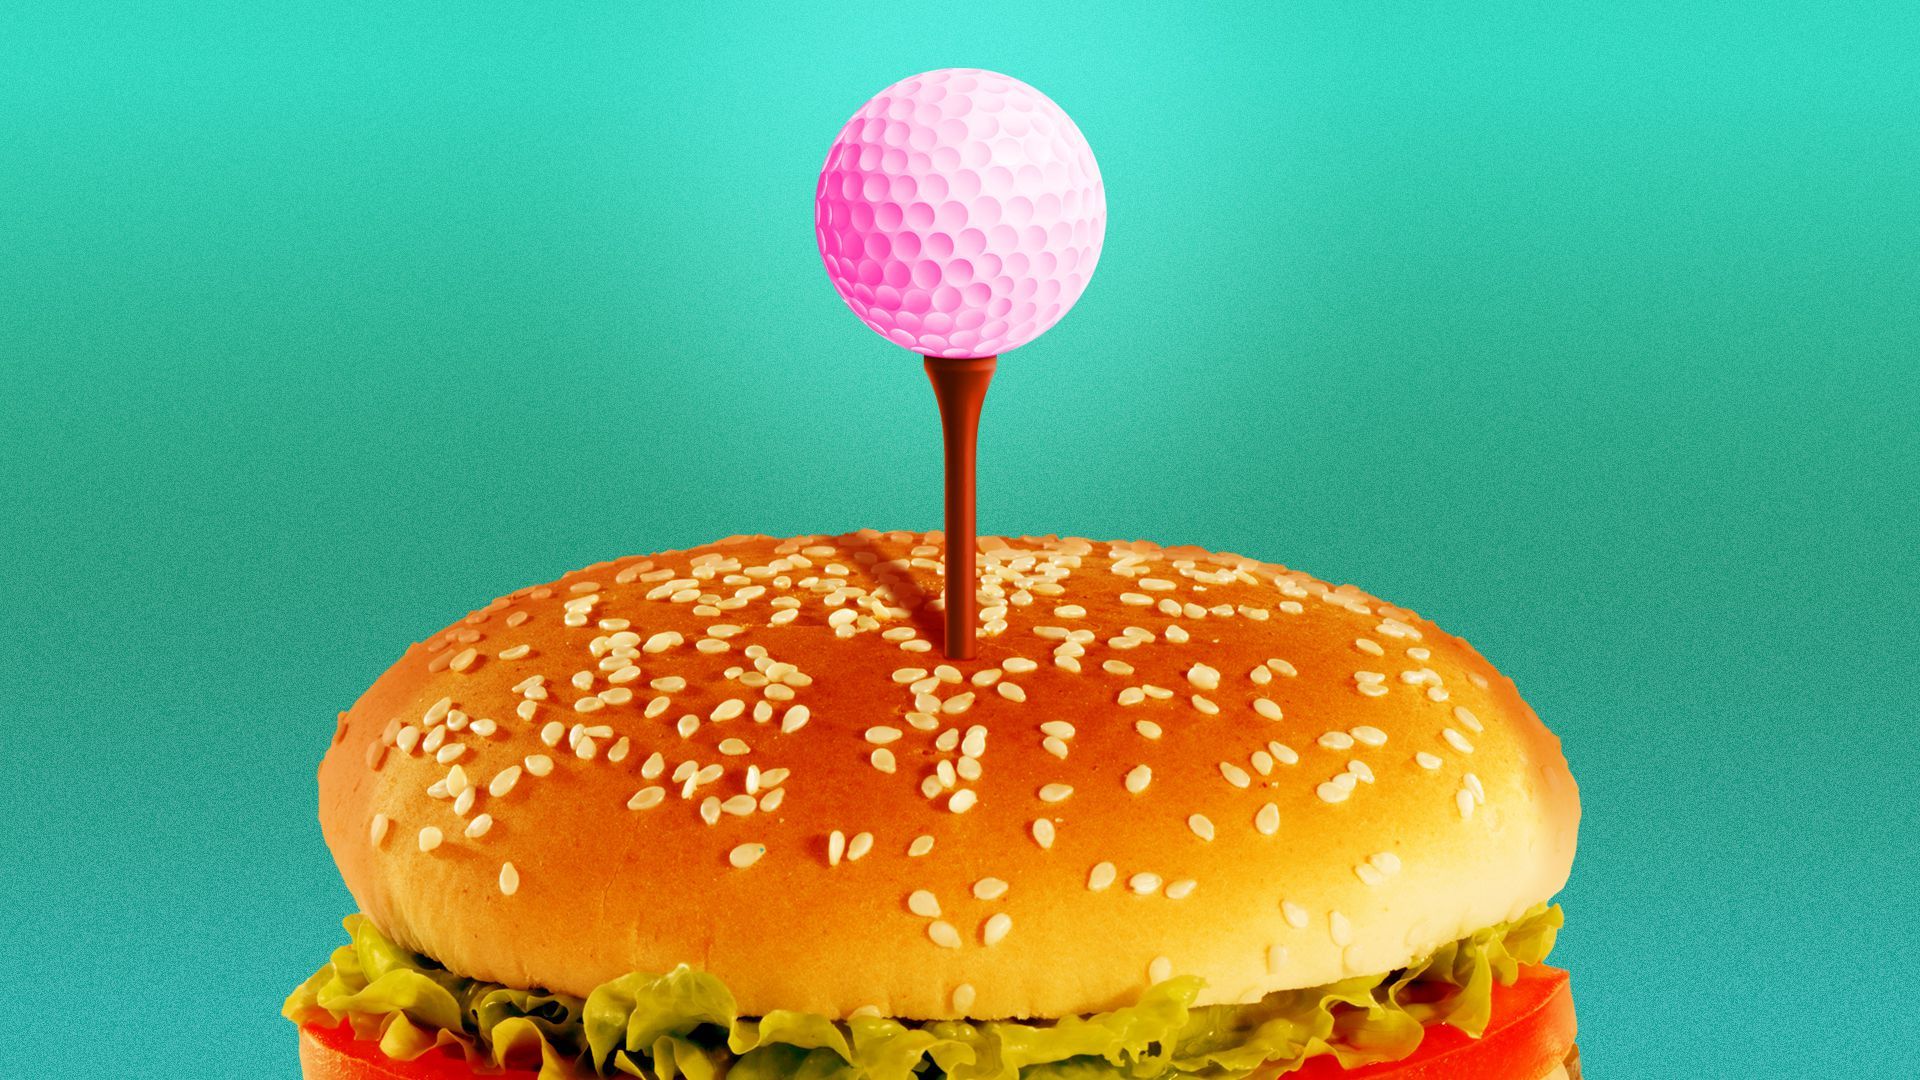 Illustration of a golfball on a tee sticking out of a burger